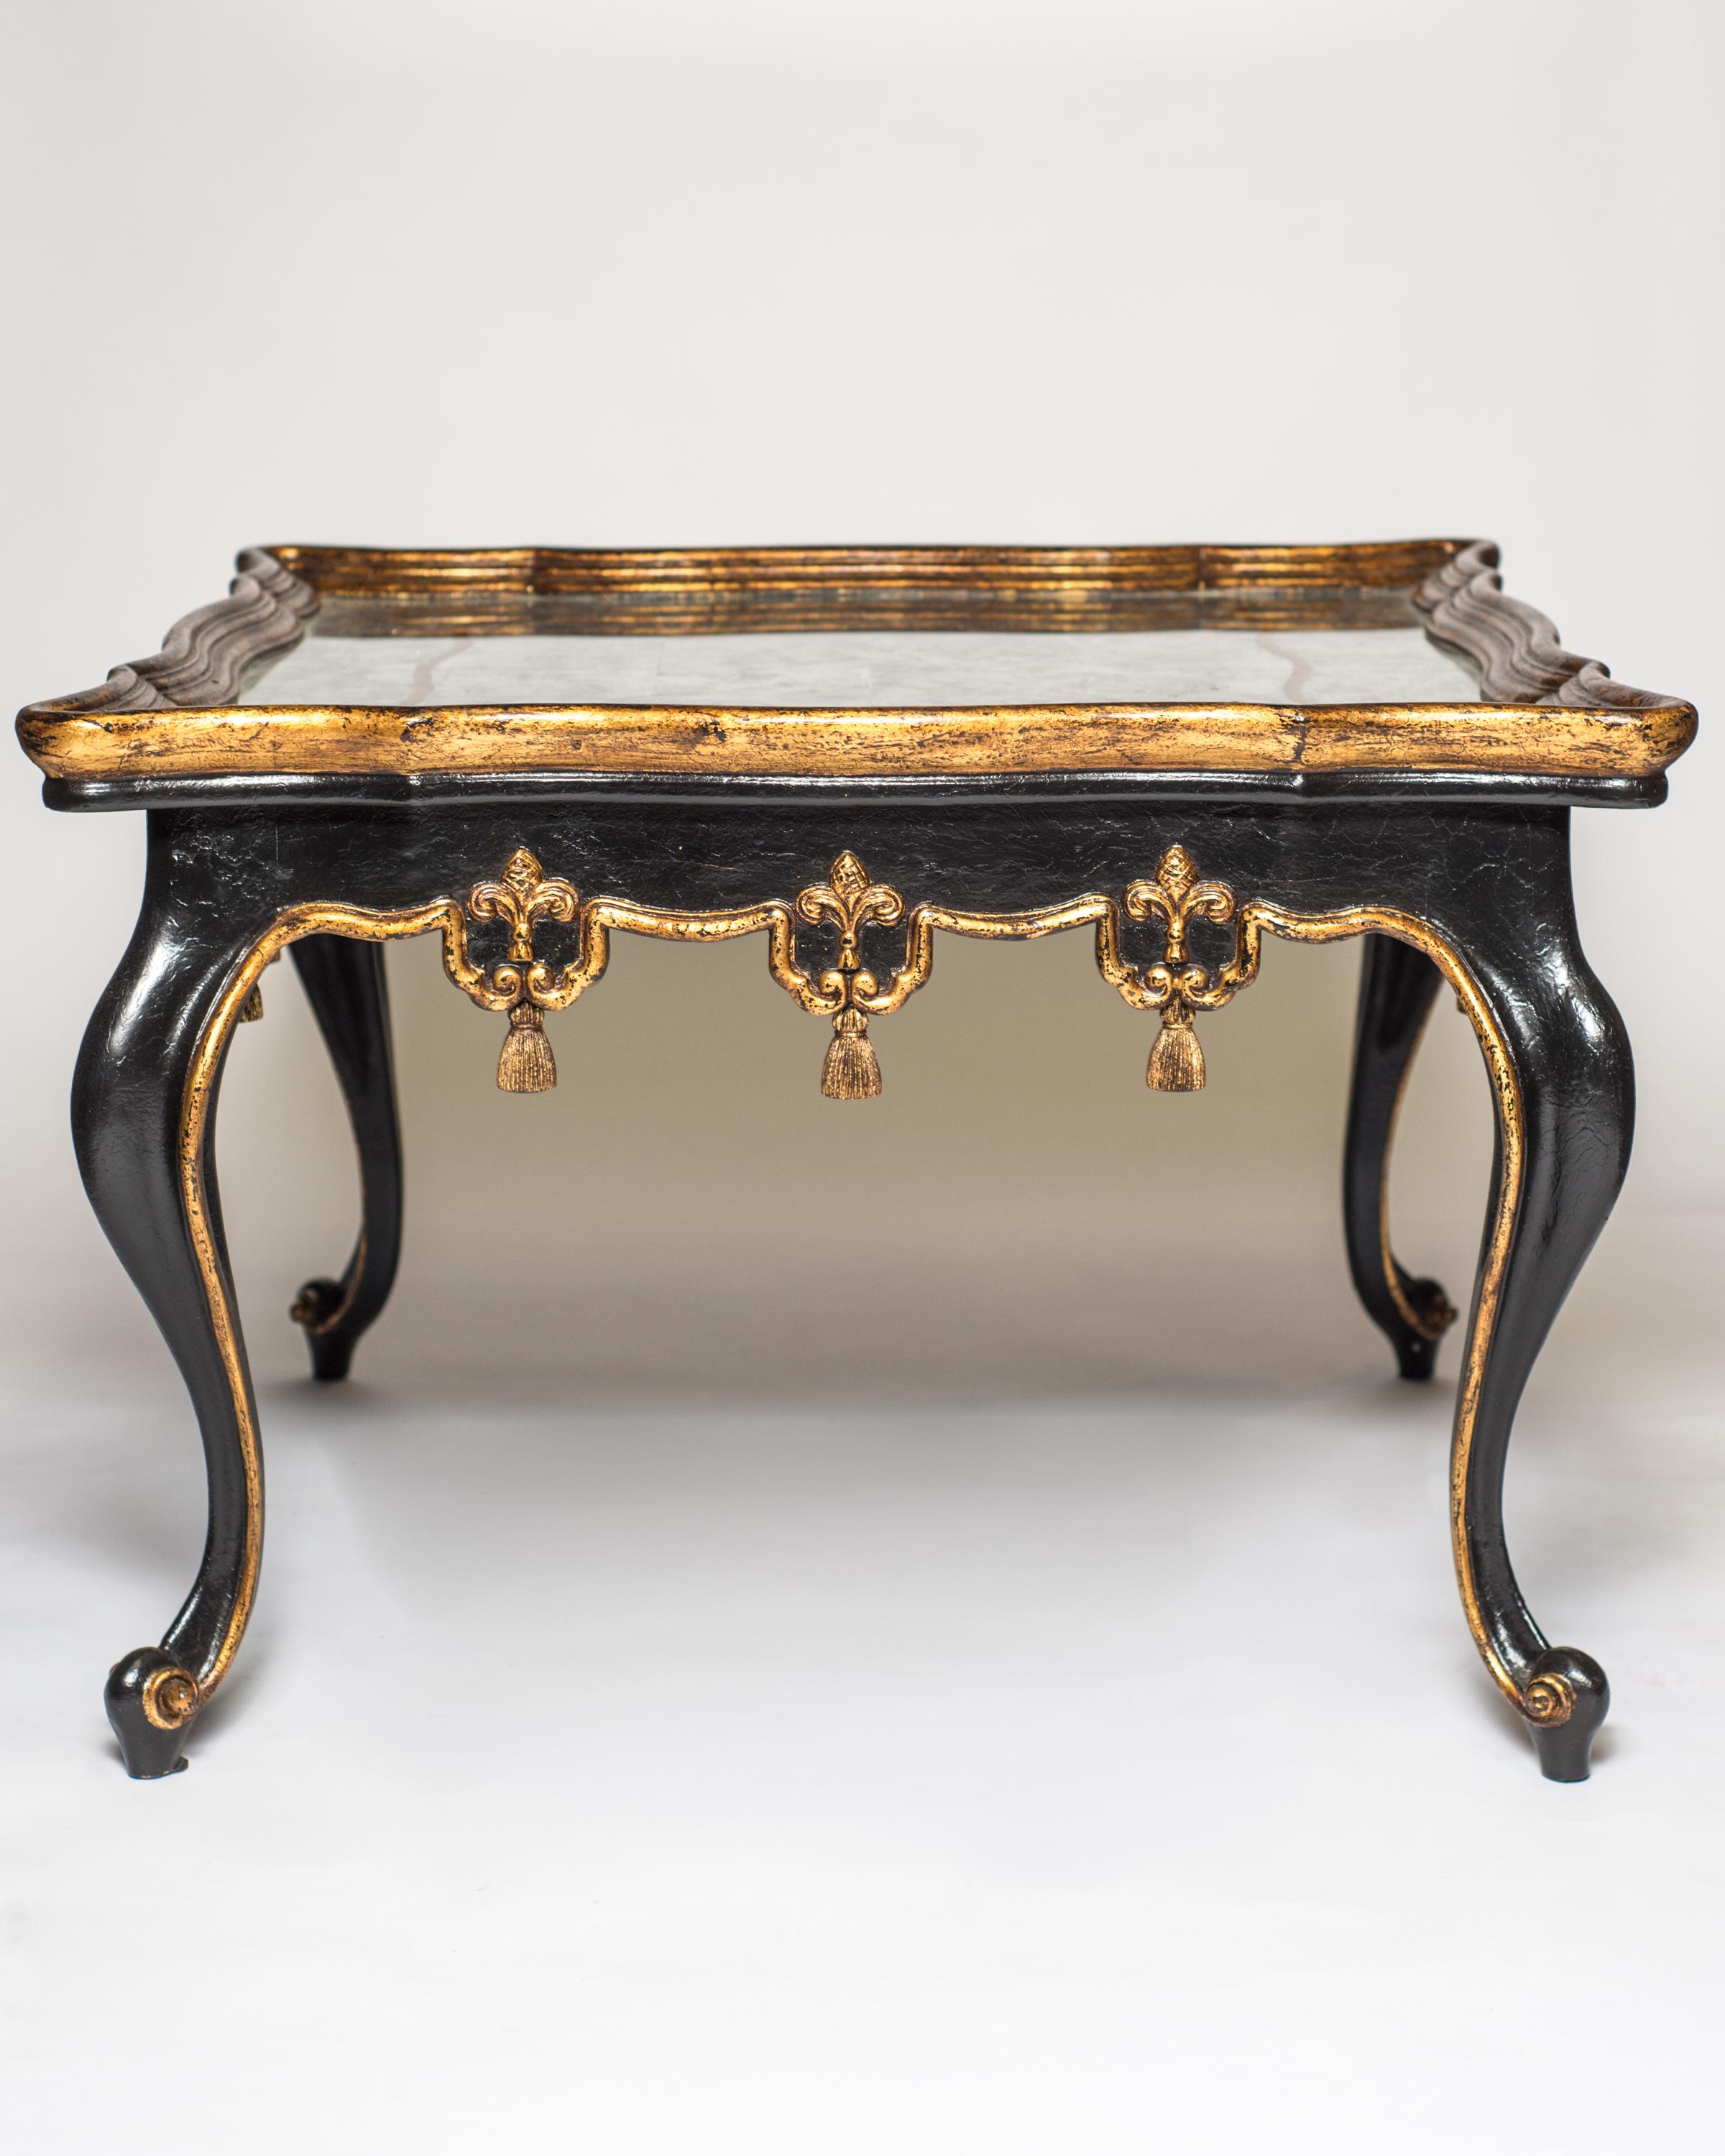 A pair of black and gilded carved wood tables with verse eglomise tops. Verre eglomise is a French term referring to the process of applying both a design and gilding onto the rear face of glass to produce a mirror finish. Carved scroll,